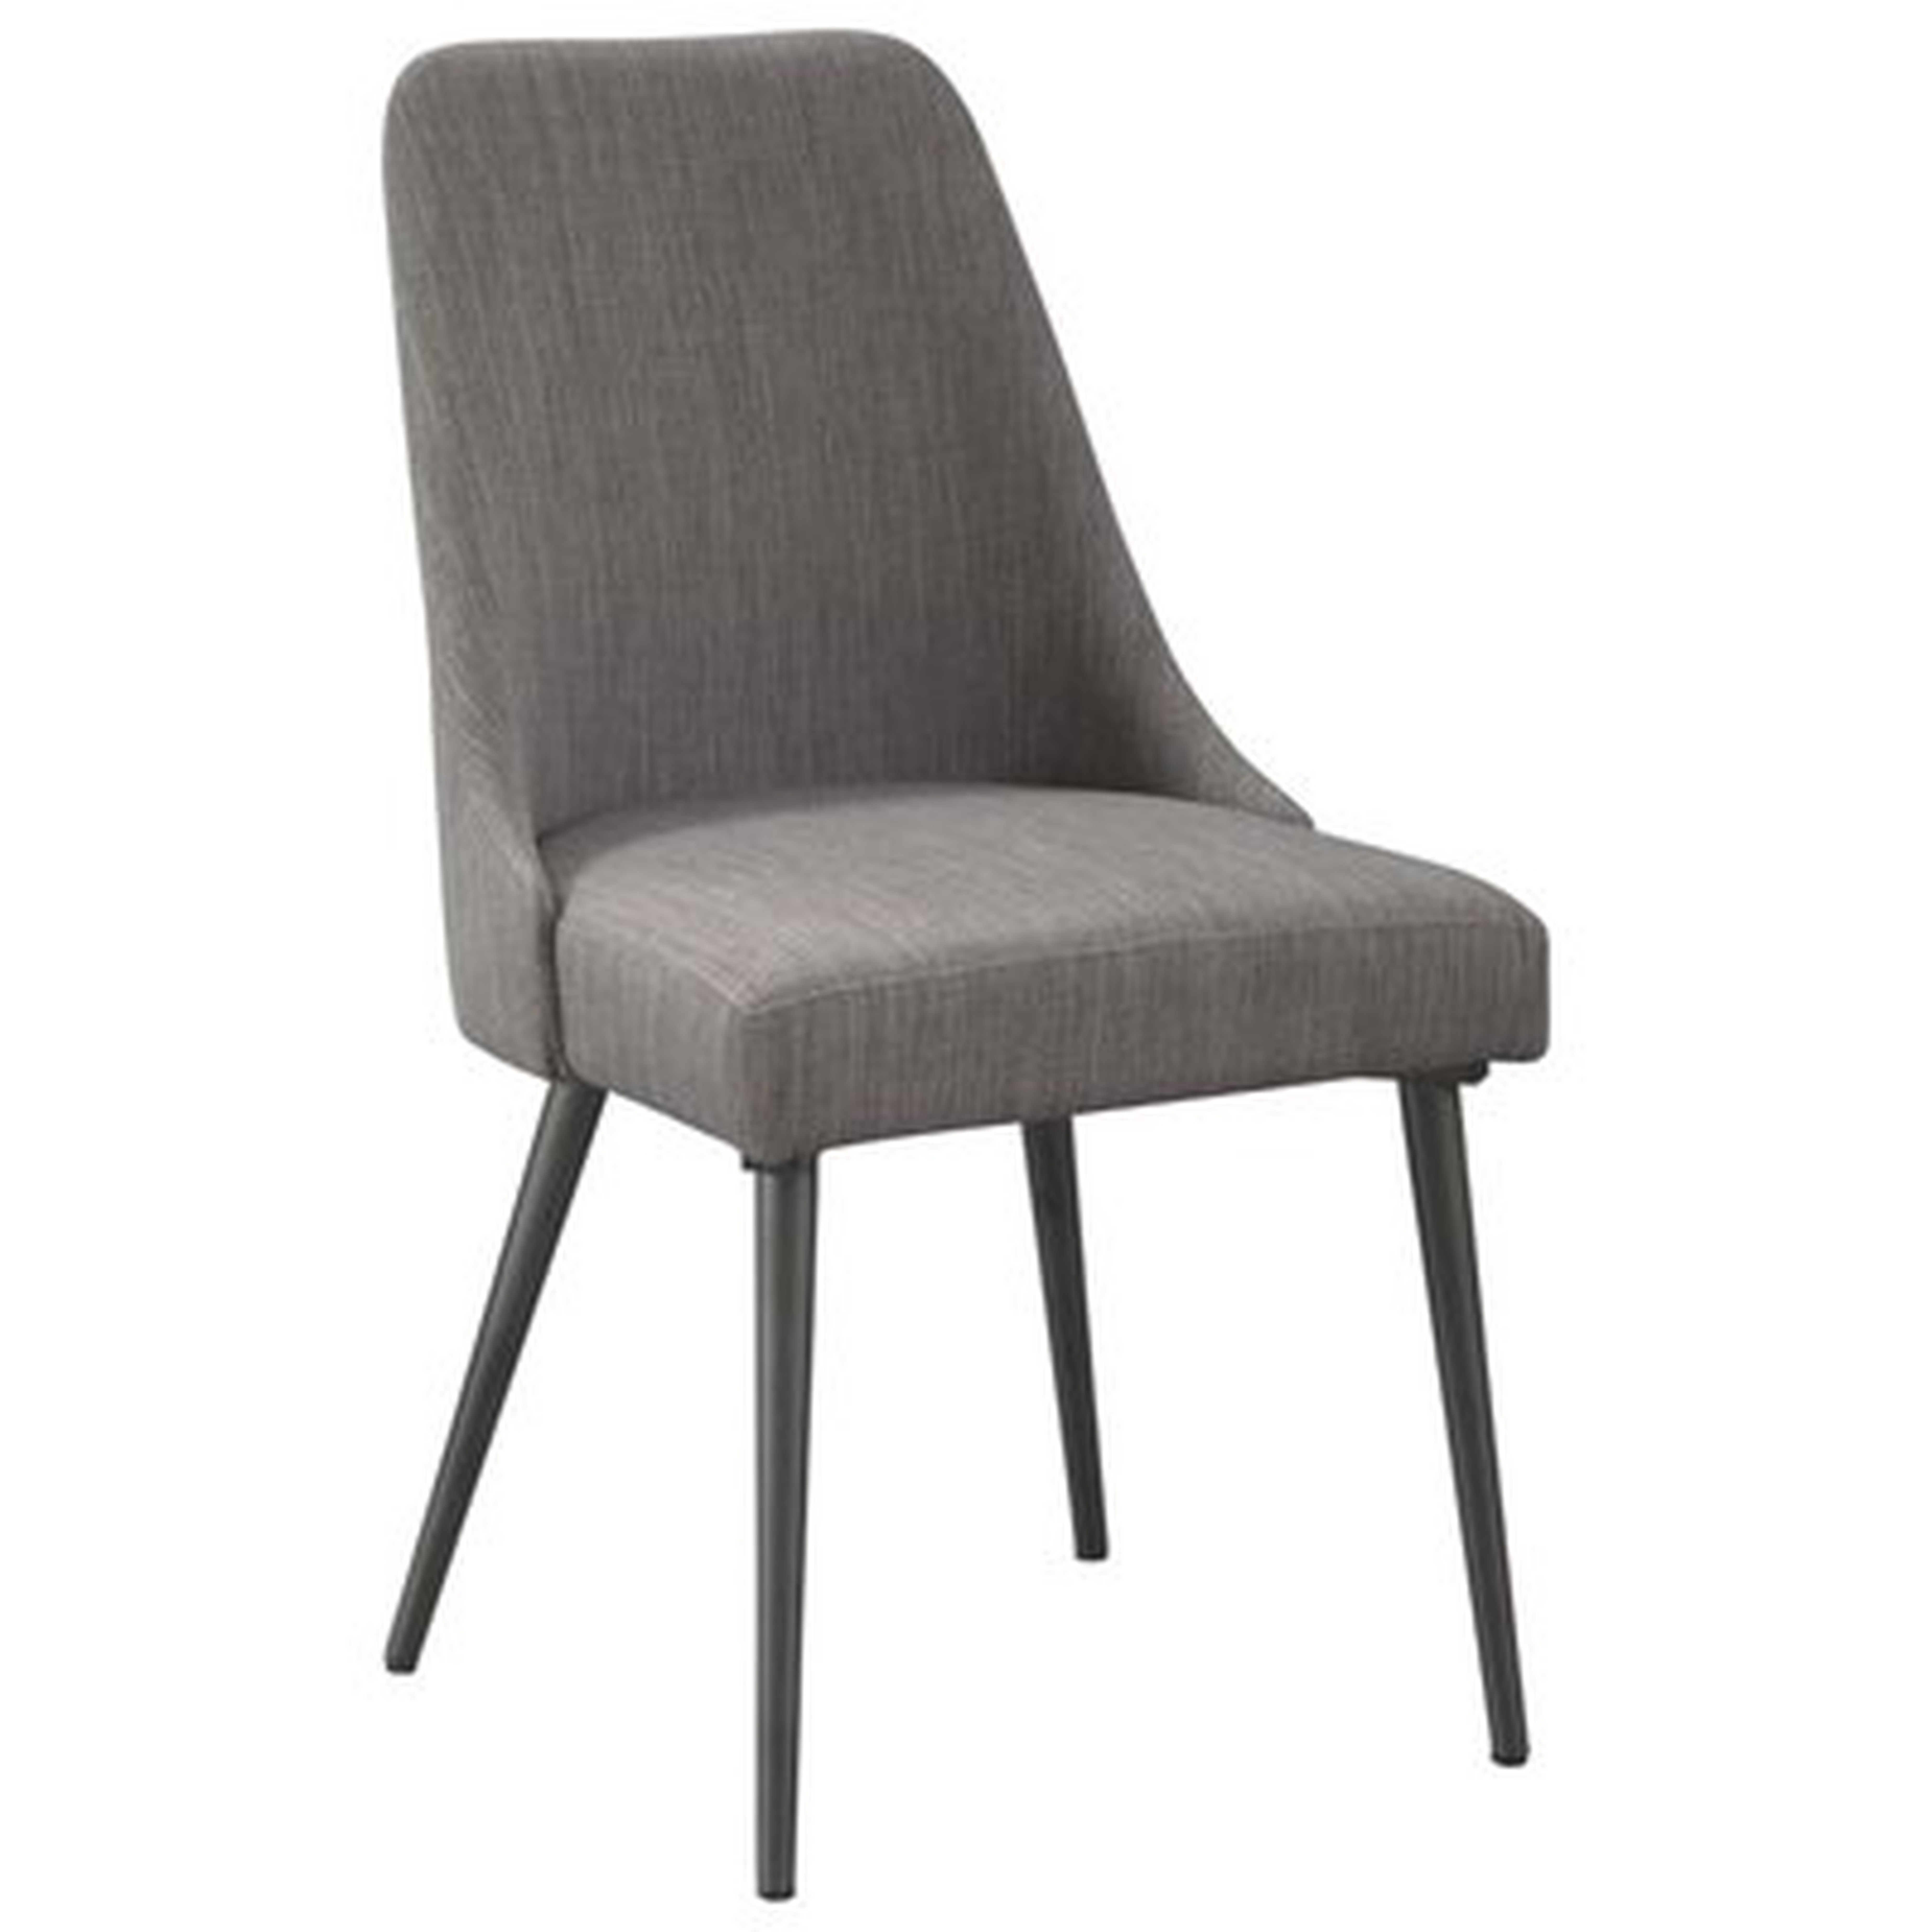 Escuderoy Upholstered Dining Chair (Set of 2) - Wayfair